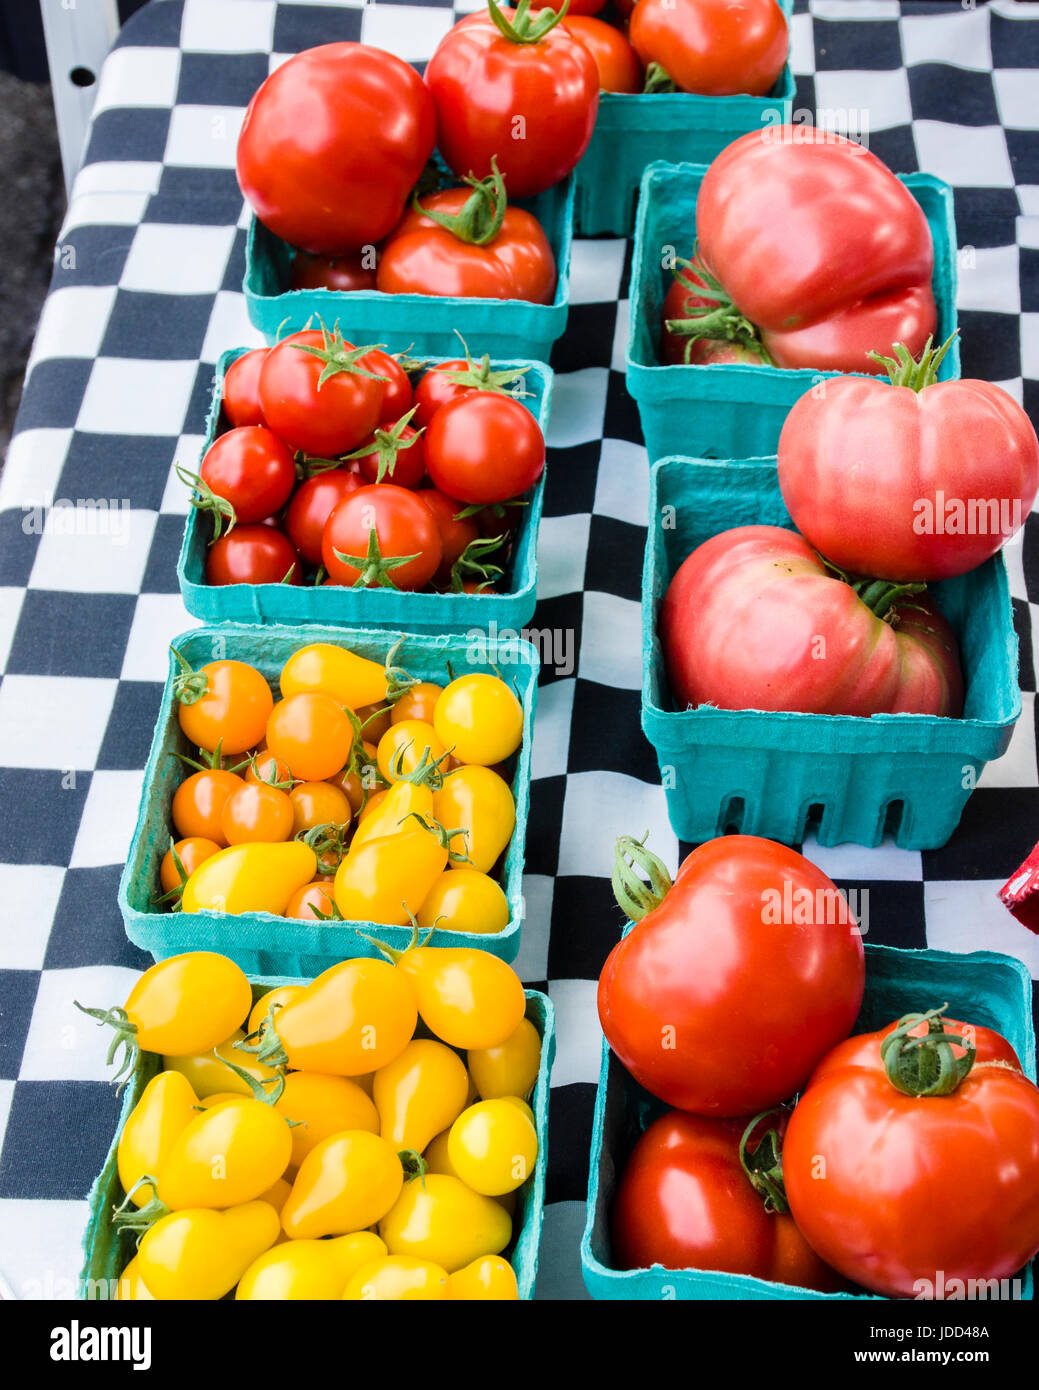 Display of pear and red tomatoes in boxes at the farm market Stock Photo